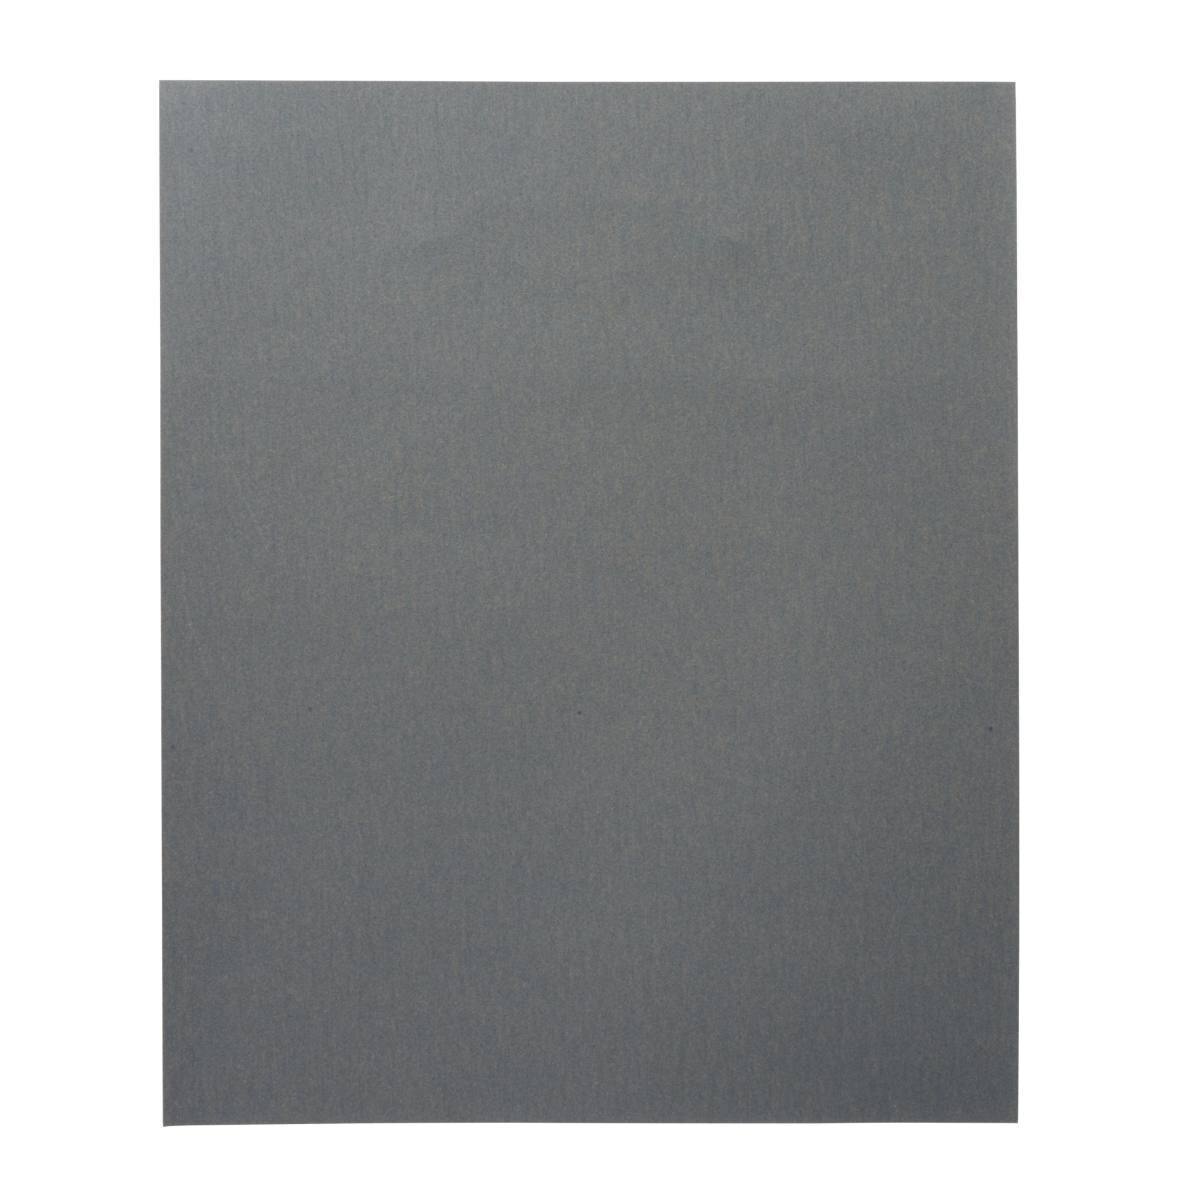 3M Wetordry 734 disc paper, 230 mm x 280 mm, P400 "Packed per 25 pieces